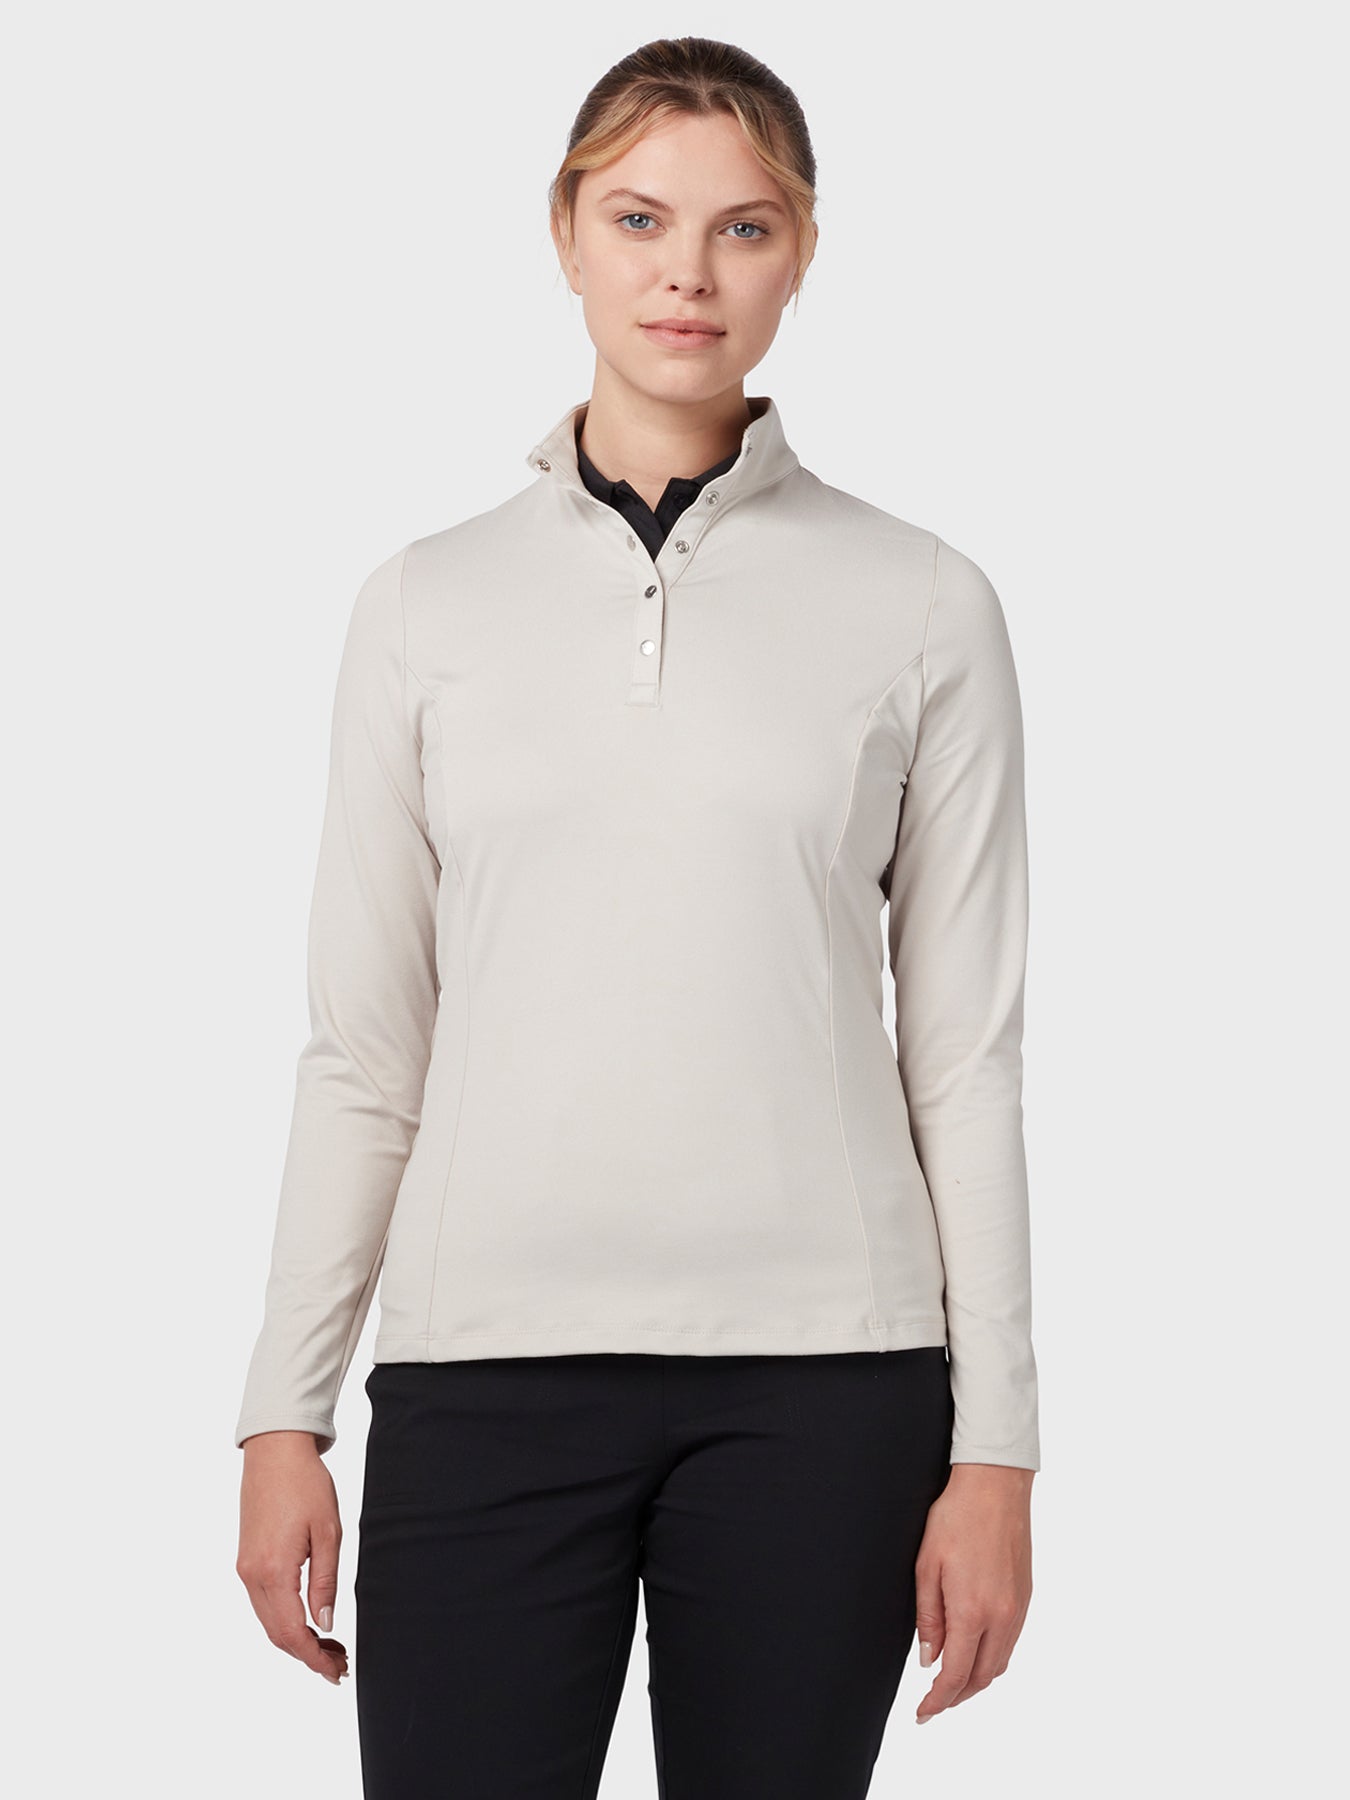 View Womens Thermal Longsleeve Fleece Back Jersey Polo In Chateau Grey Chateau Grey L information